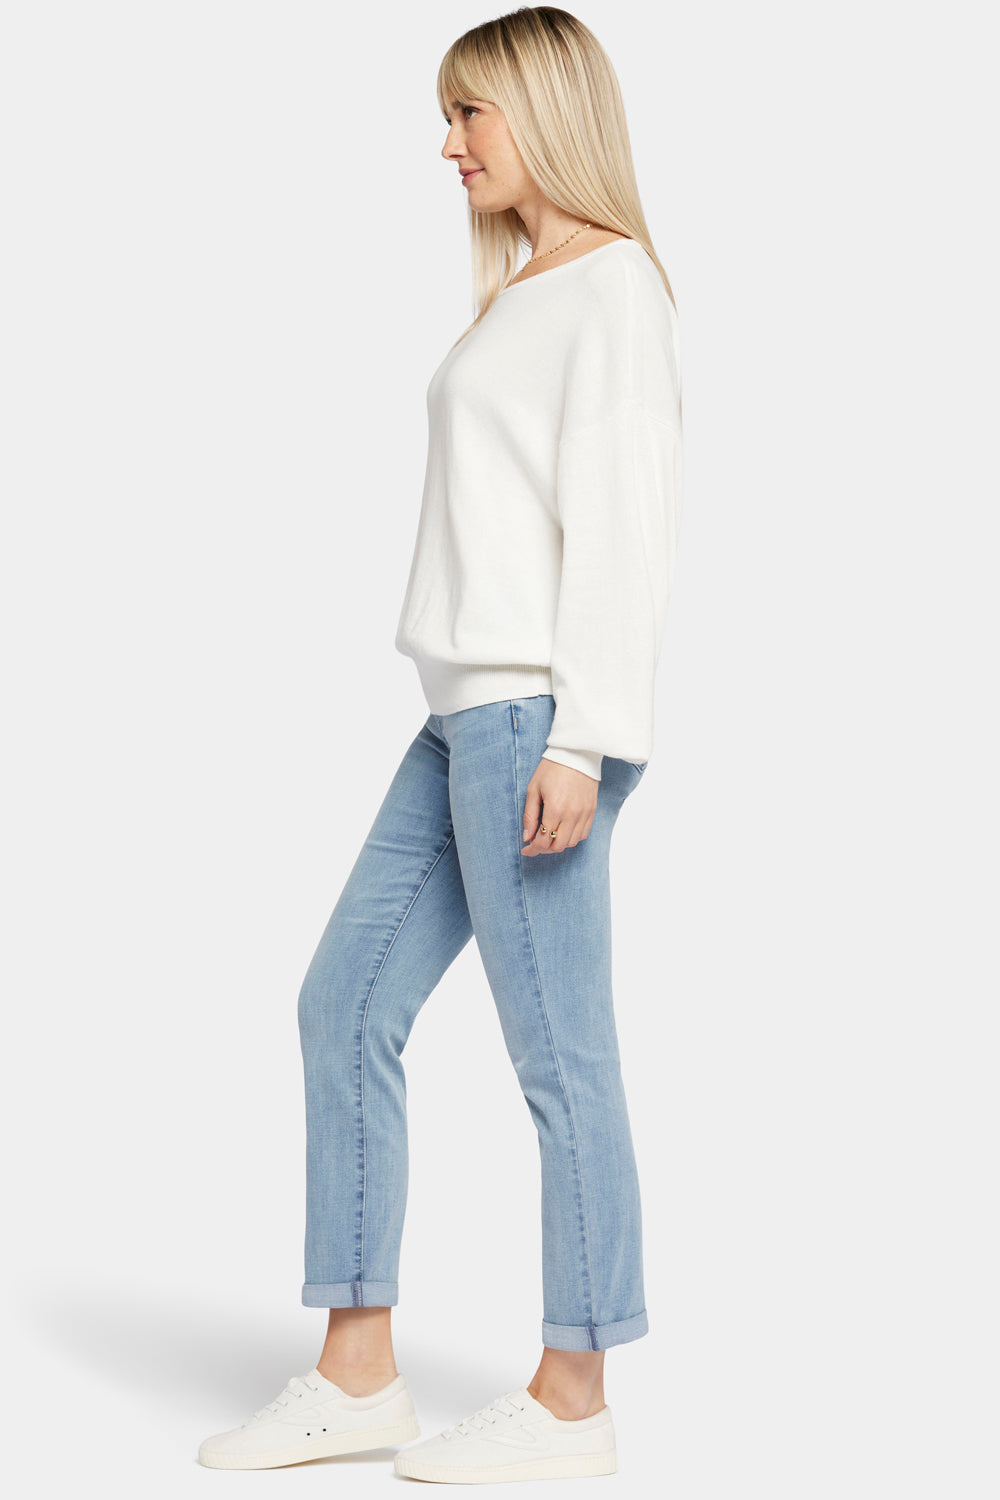 NYDJ Dolman Sleeved Boatneck Sweater With Cashmere - Ivory